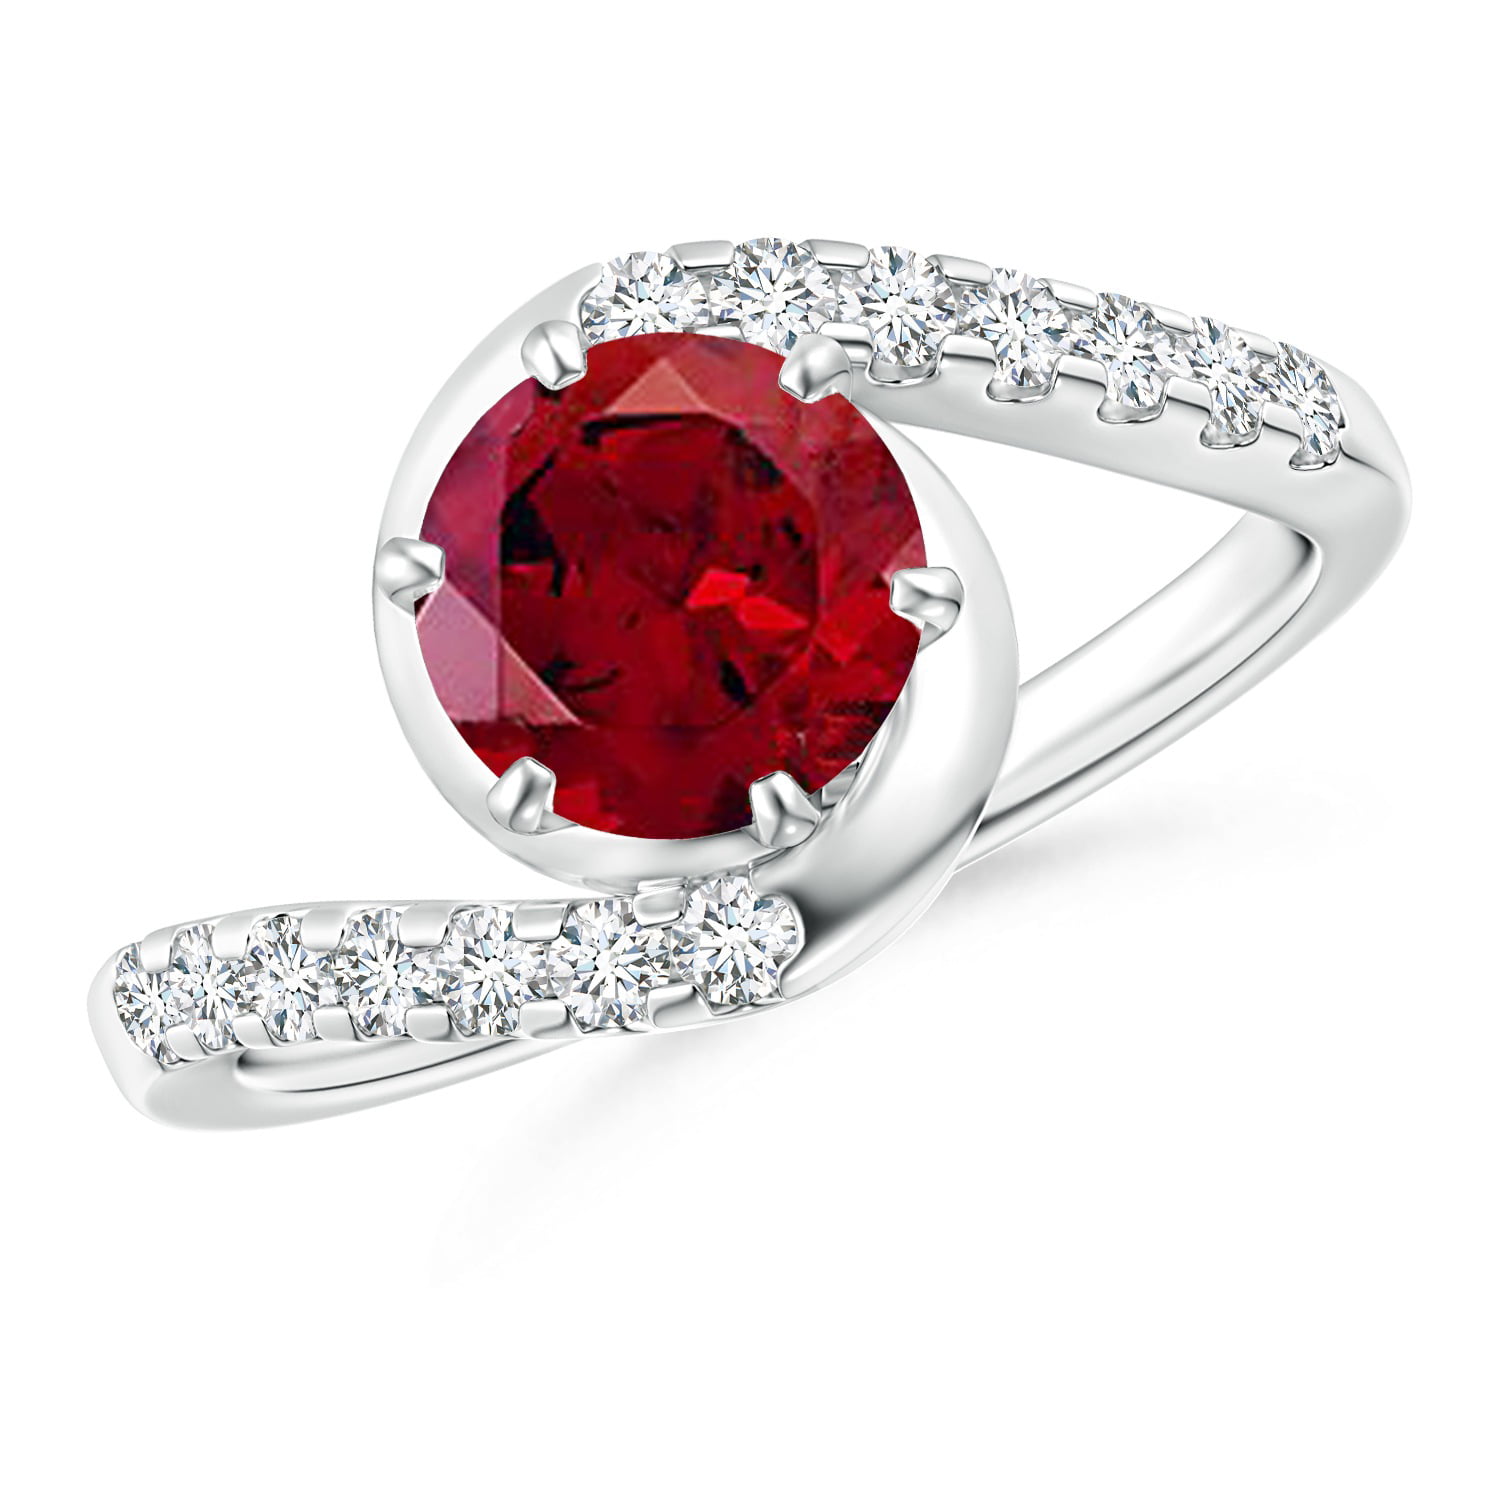 Details about   Ruby Men's Ring 925 Sterling Silver Handmade Gemstone Turkish Ring Size 7-13